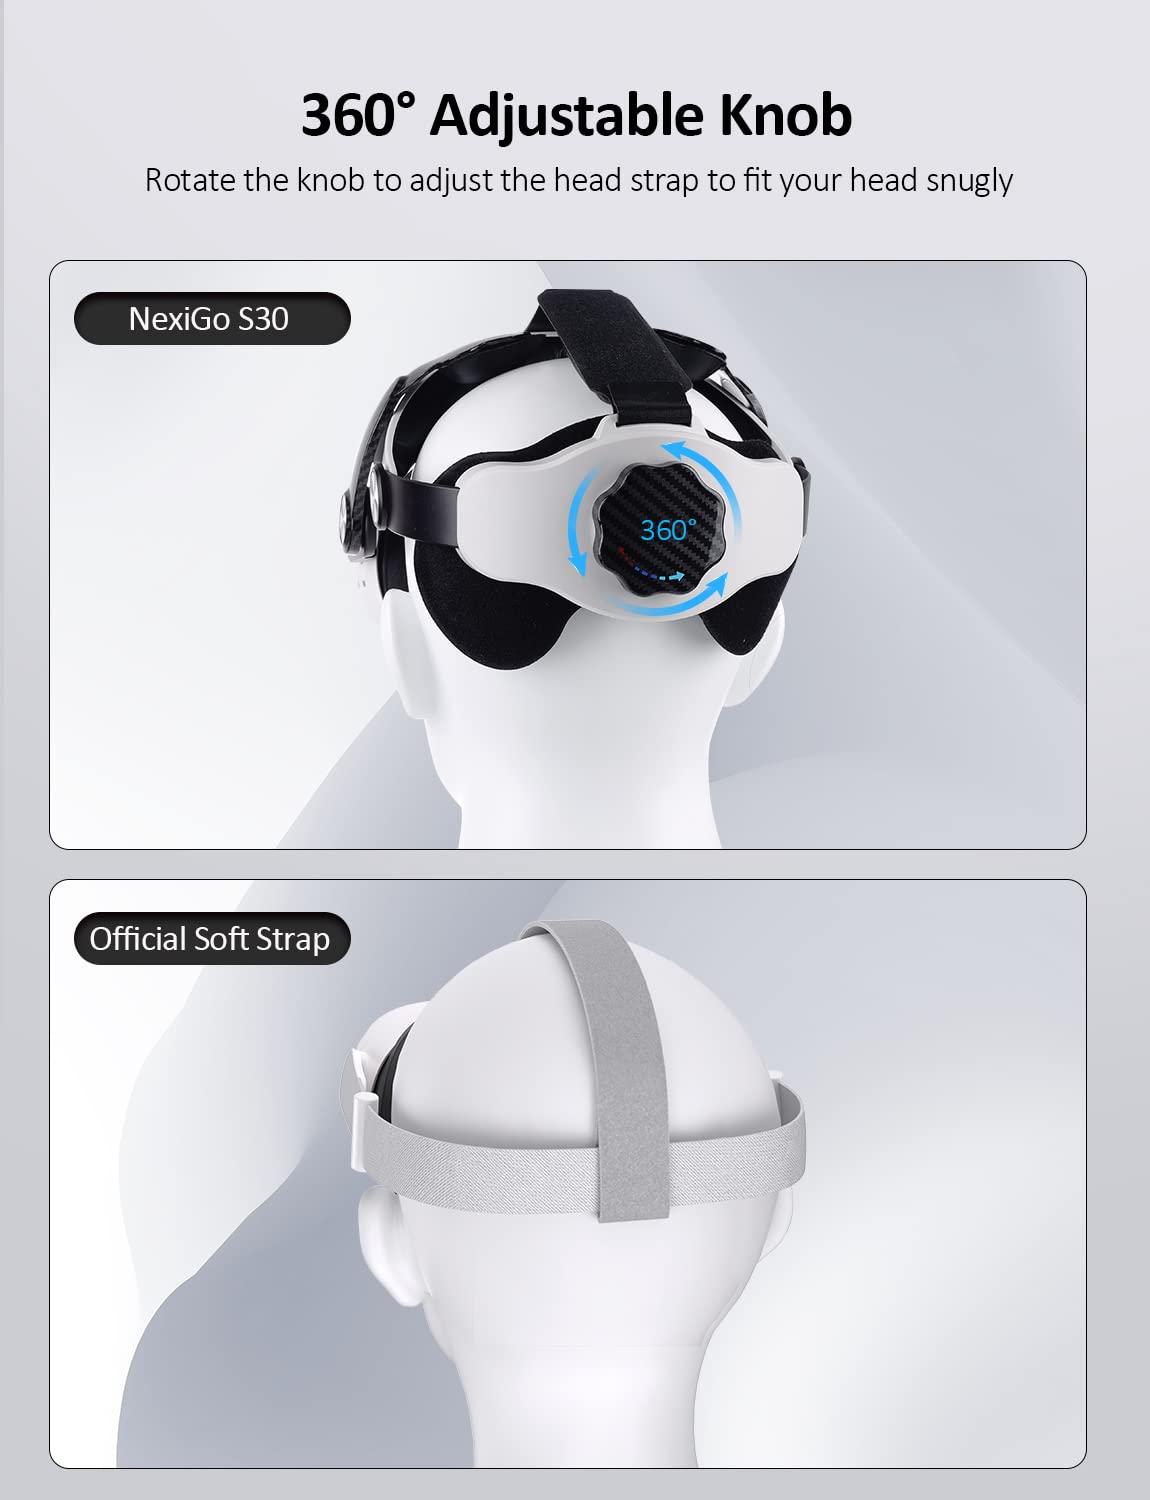 NexiGo Head Strap for Oculus Quest 2, Replacement for Elite Strap, Adjustable Head Strap, Increased Support and Balance, Reduced Head Pressure for More Comfortable and Immersive VR Experience